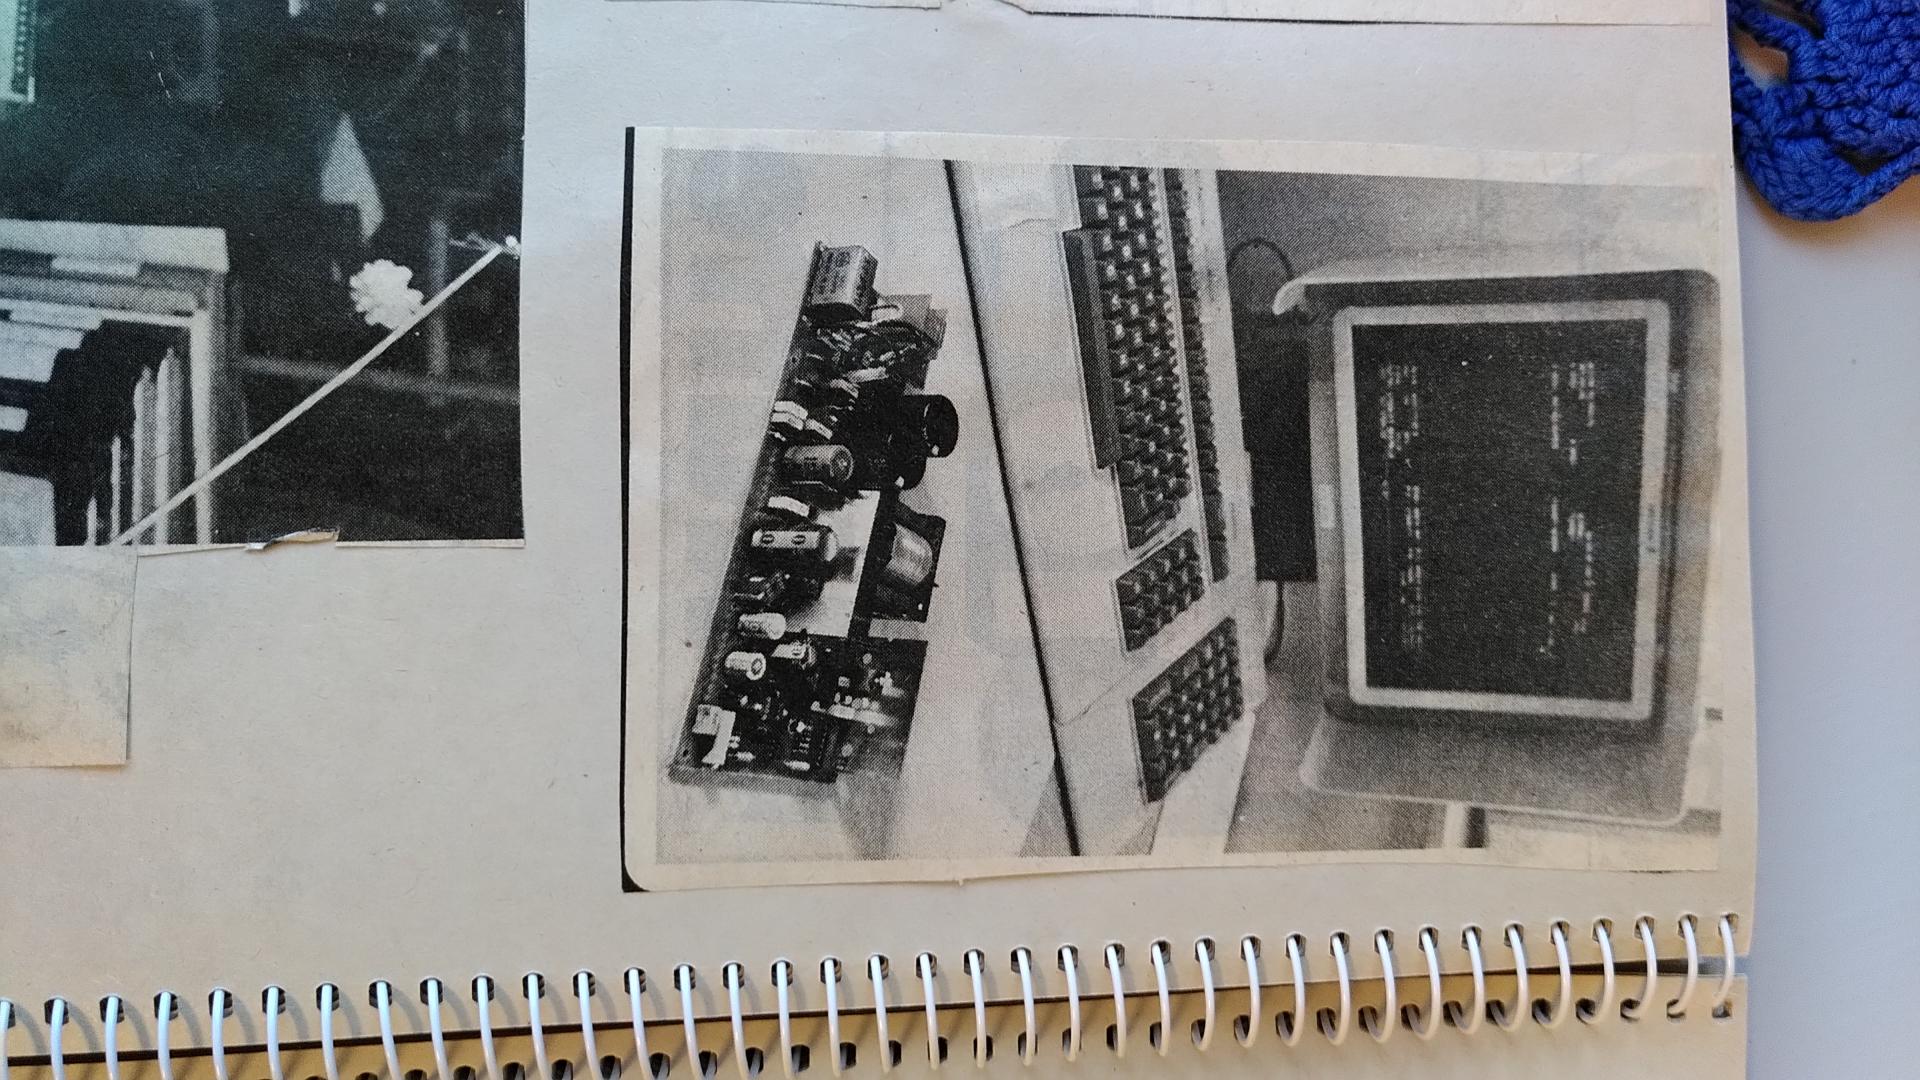 Black and white photo of a computer terminal display and keyboard. In front of it is an older type of a circuit board